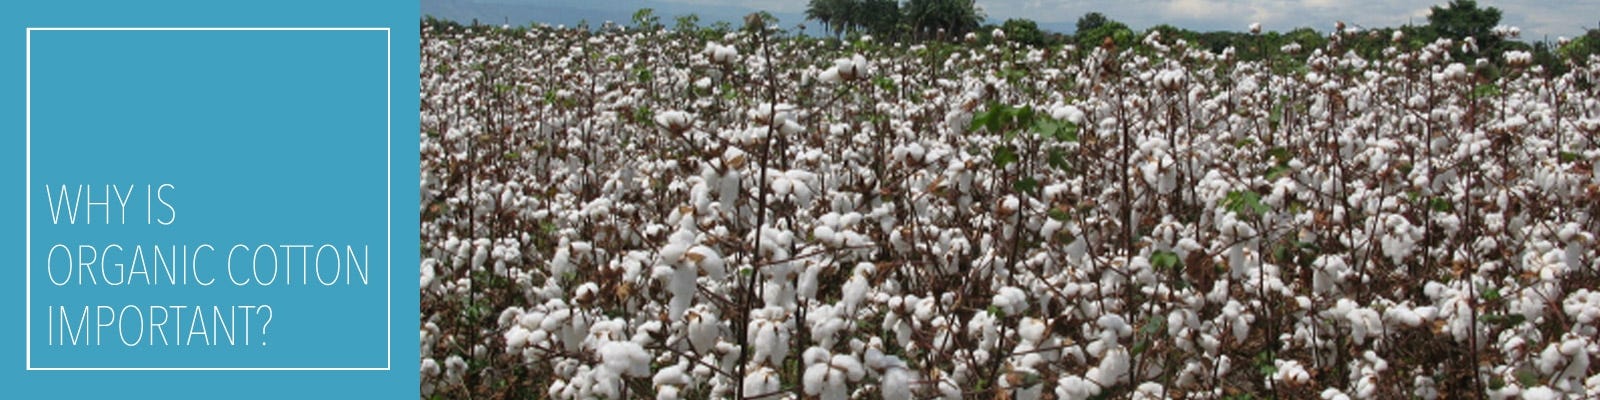 What is Conventionally Grown Cotton?